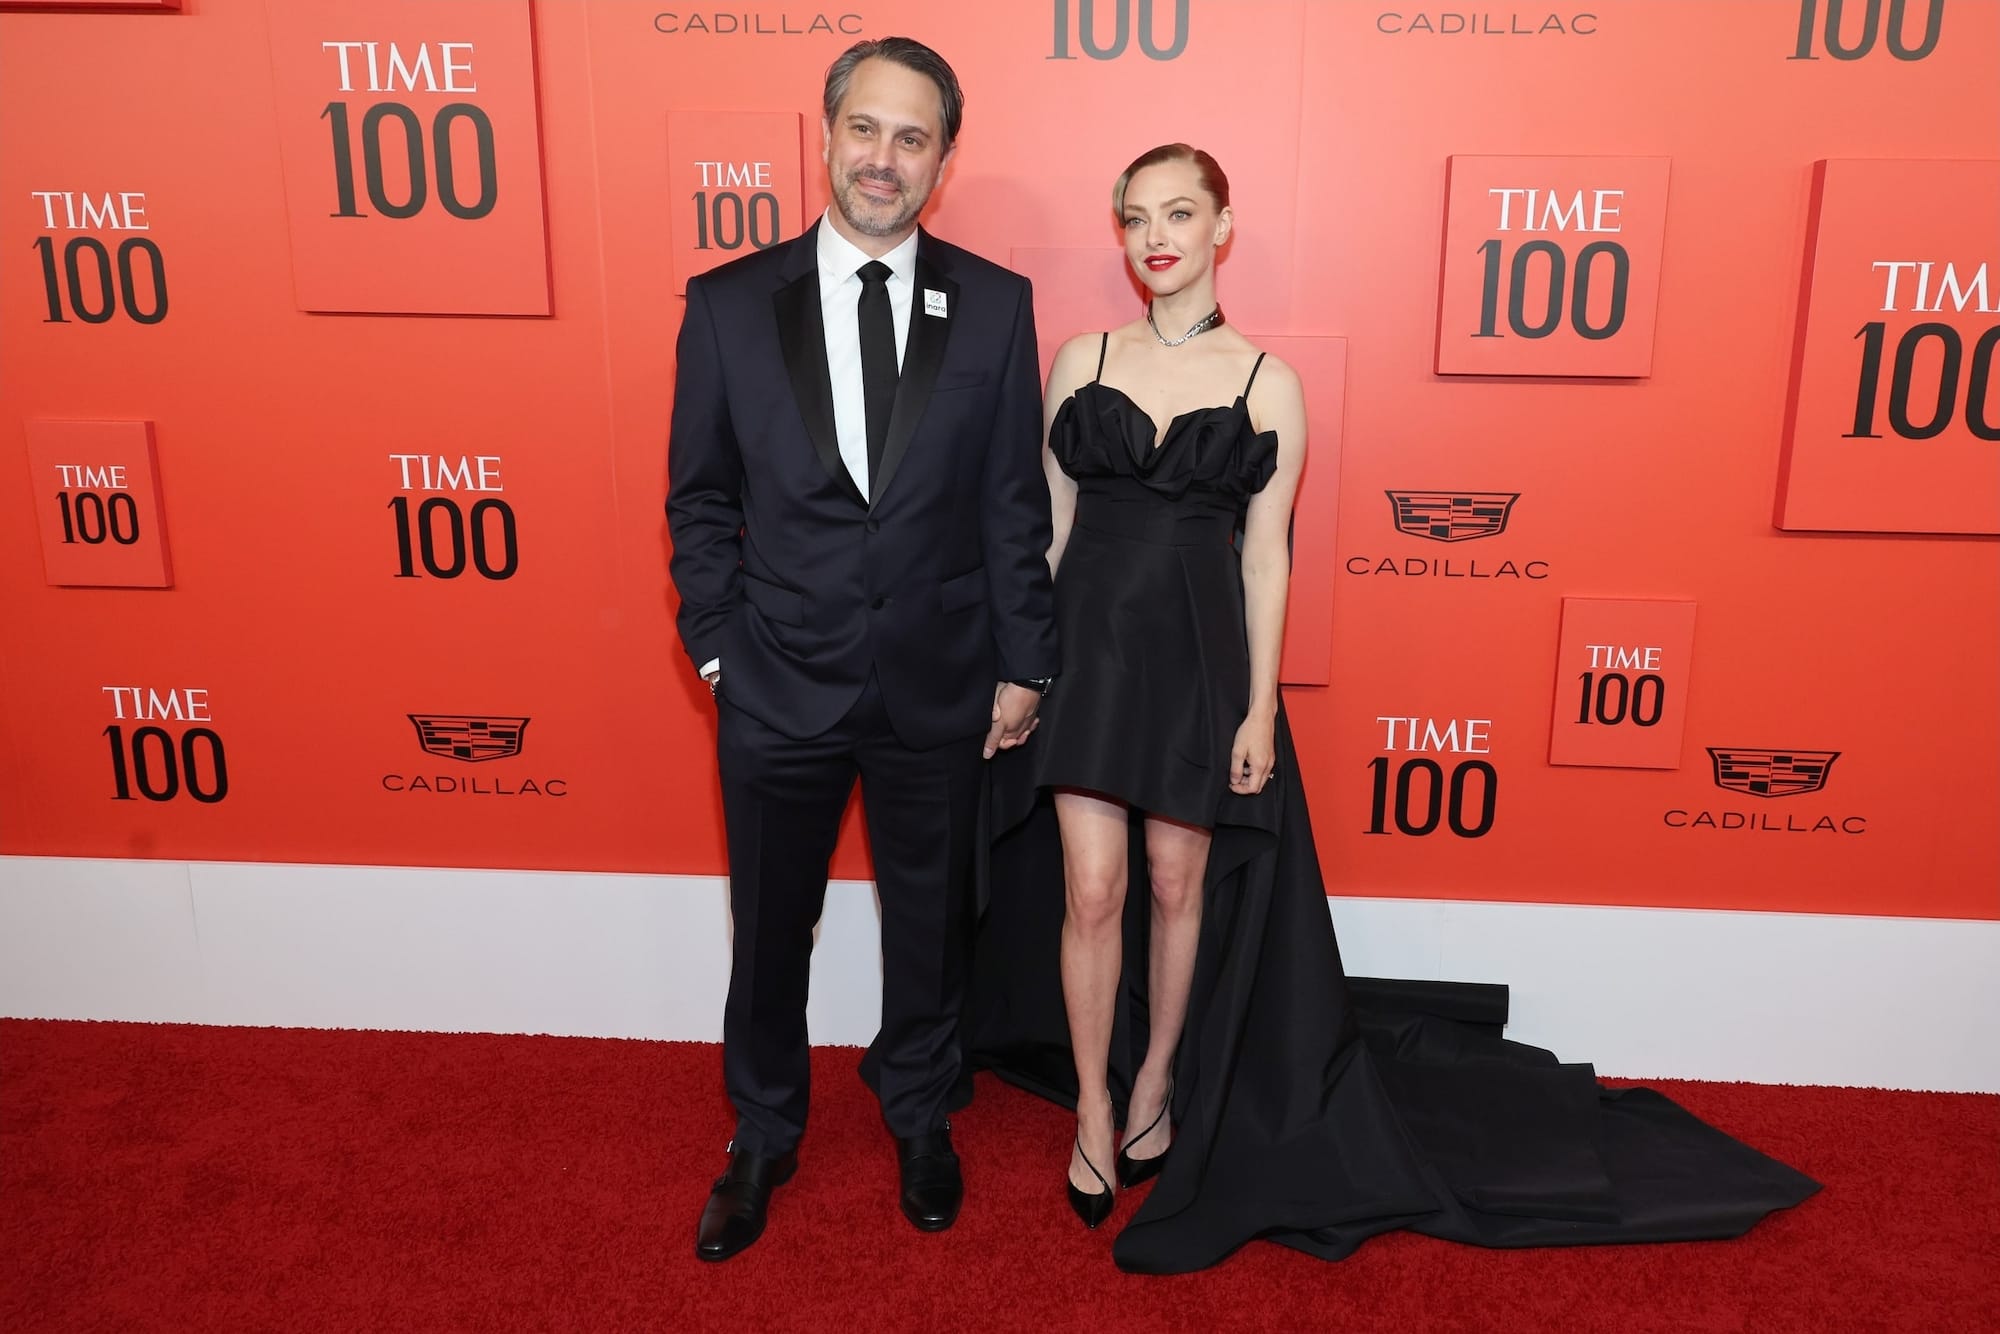 Amanda Seyfried and her husband Thomas Sadoski on the red carpet for the 2022 Time 100 Gala at the Lincoln Center in New York City.